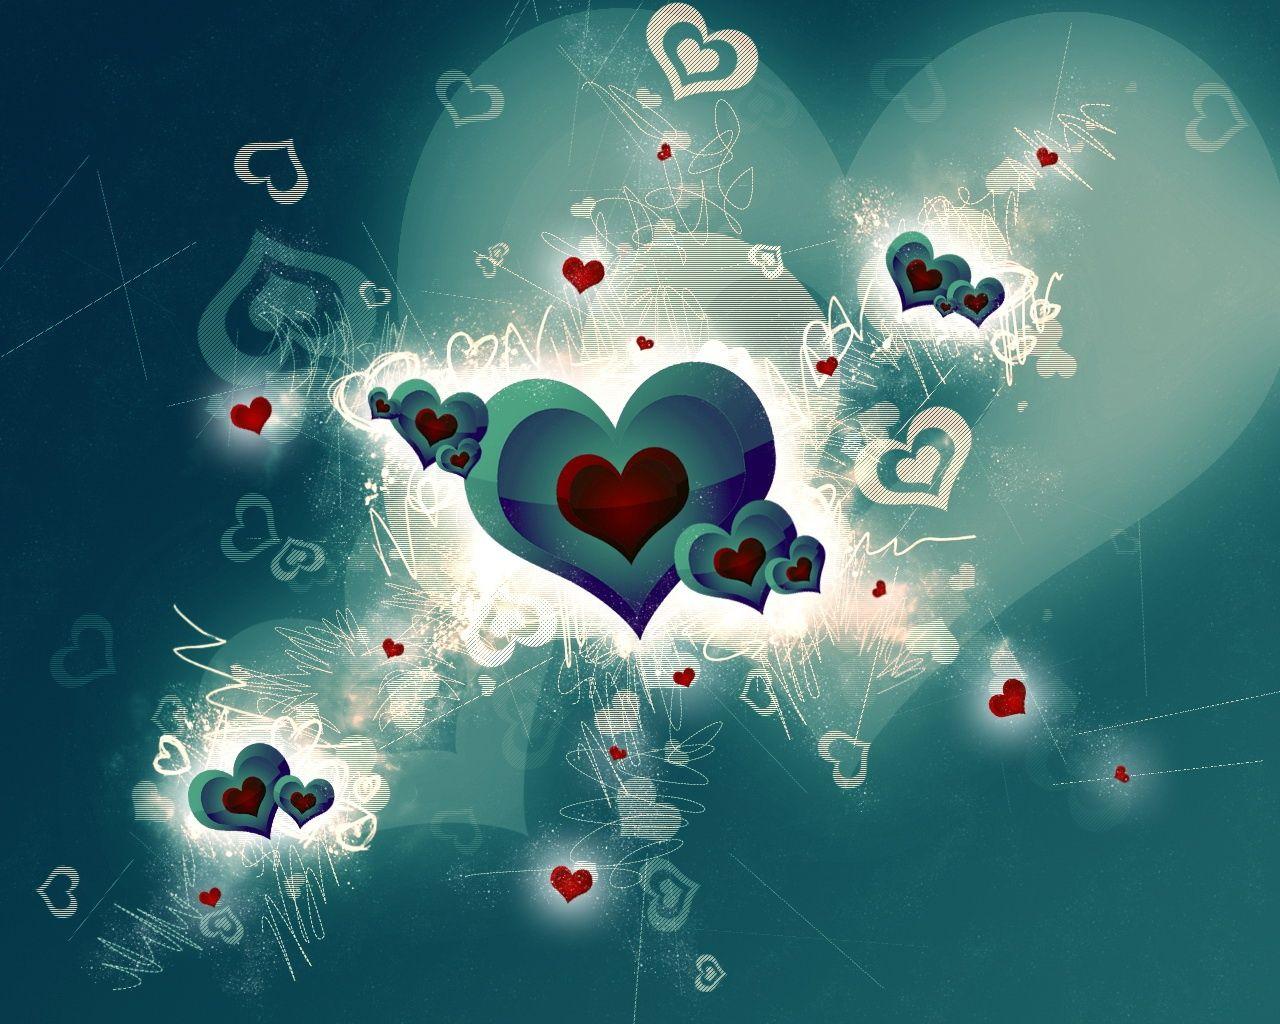 Love 3D wallpaper wallpaper for free download about (668) wallpaper